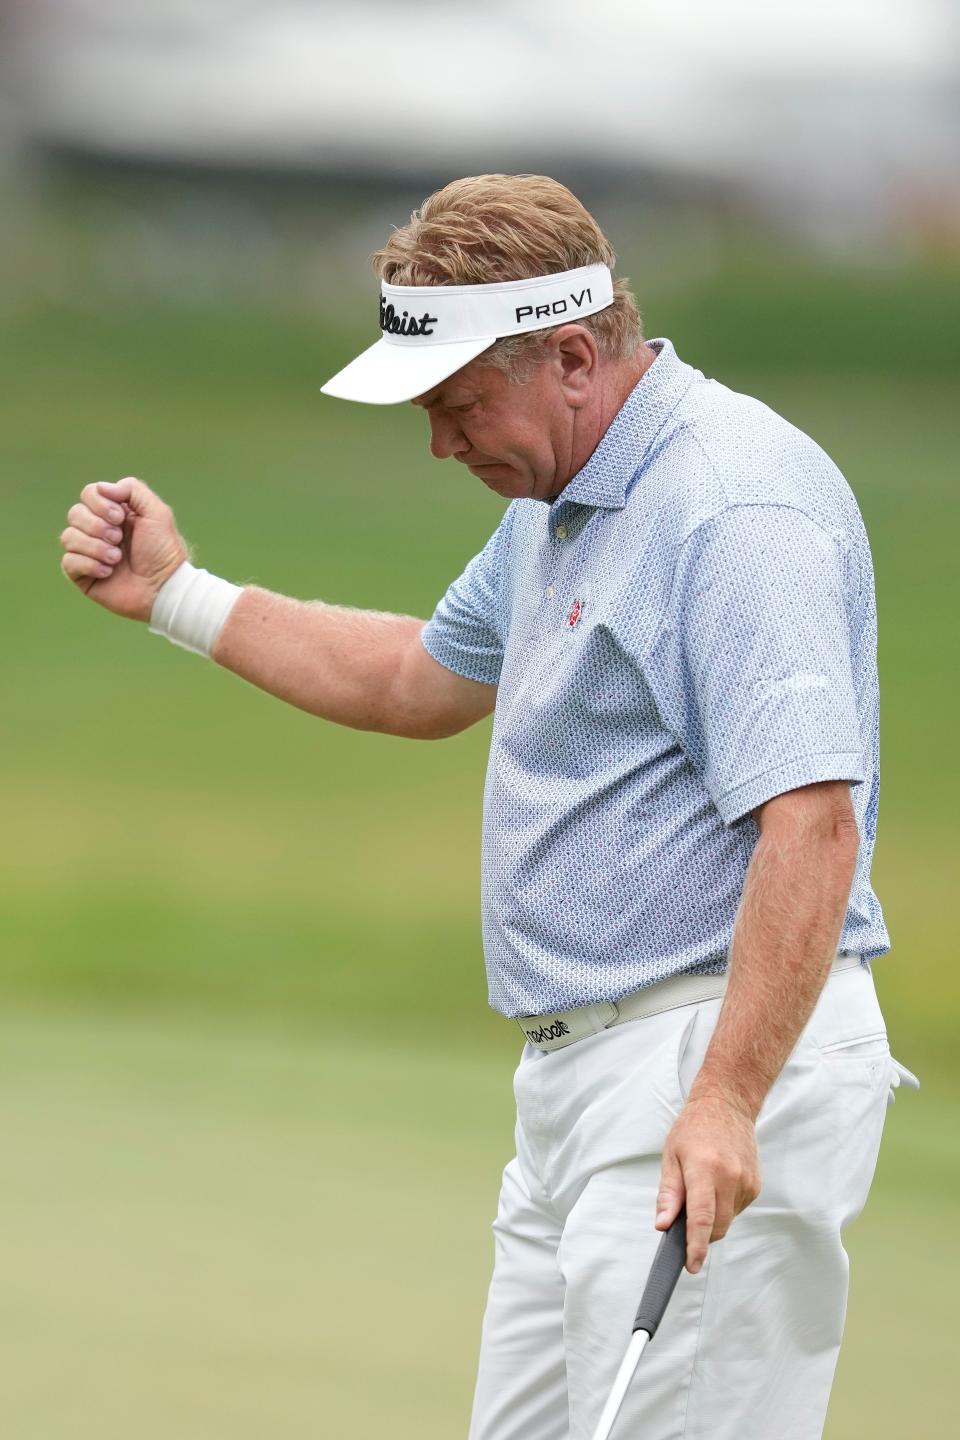 Paul Broadhurst celebrates after making a putt on the 18th green during the American Family Insurance Championship at University Ridge Golf Club on Saturday.